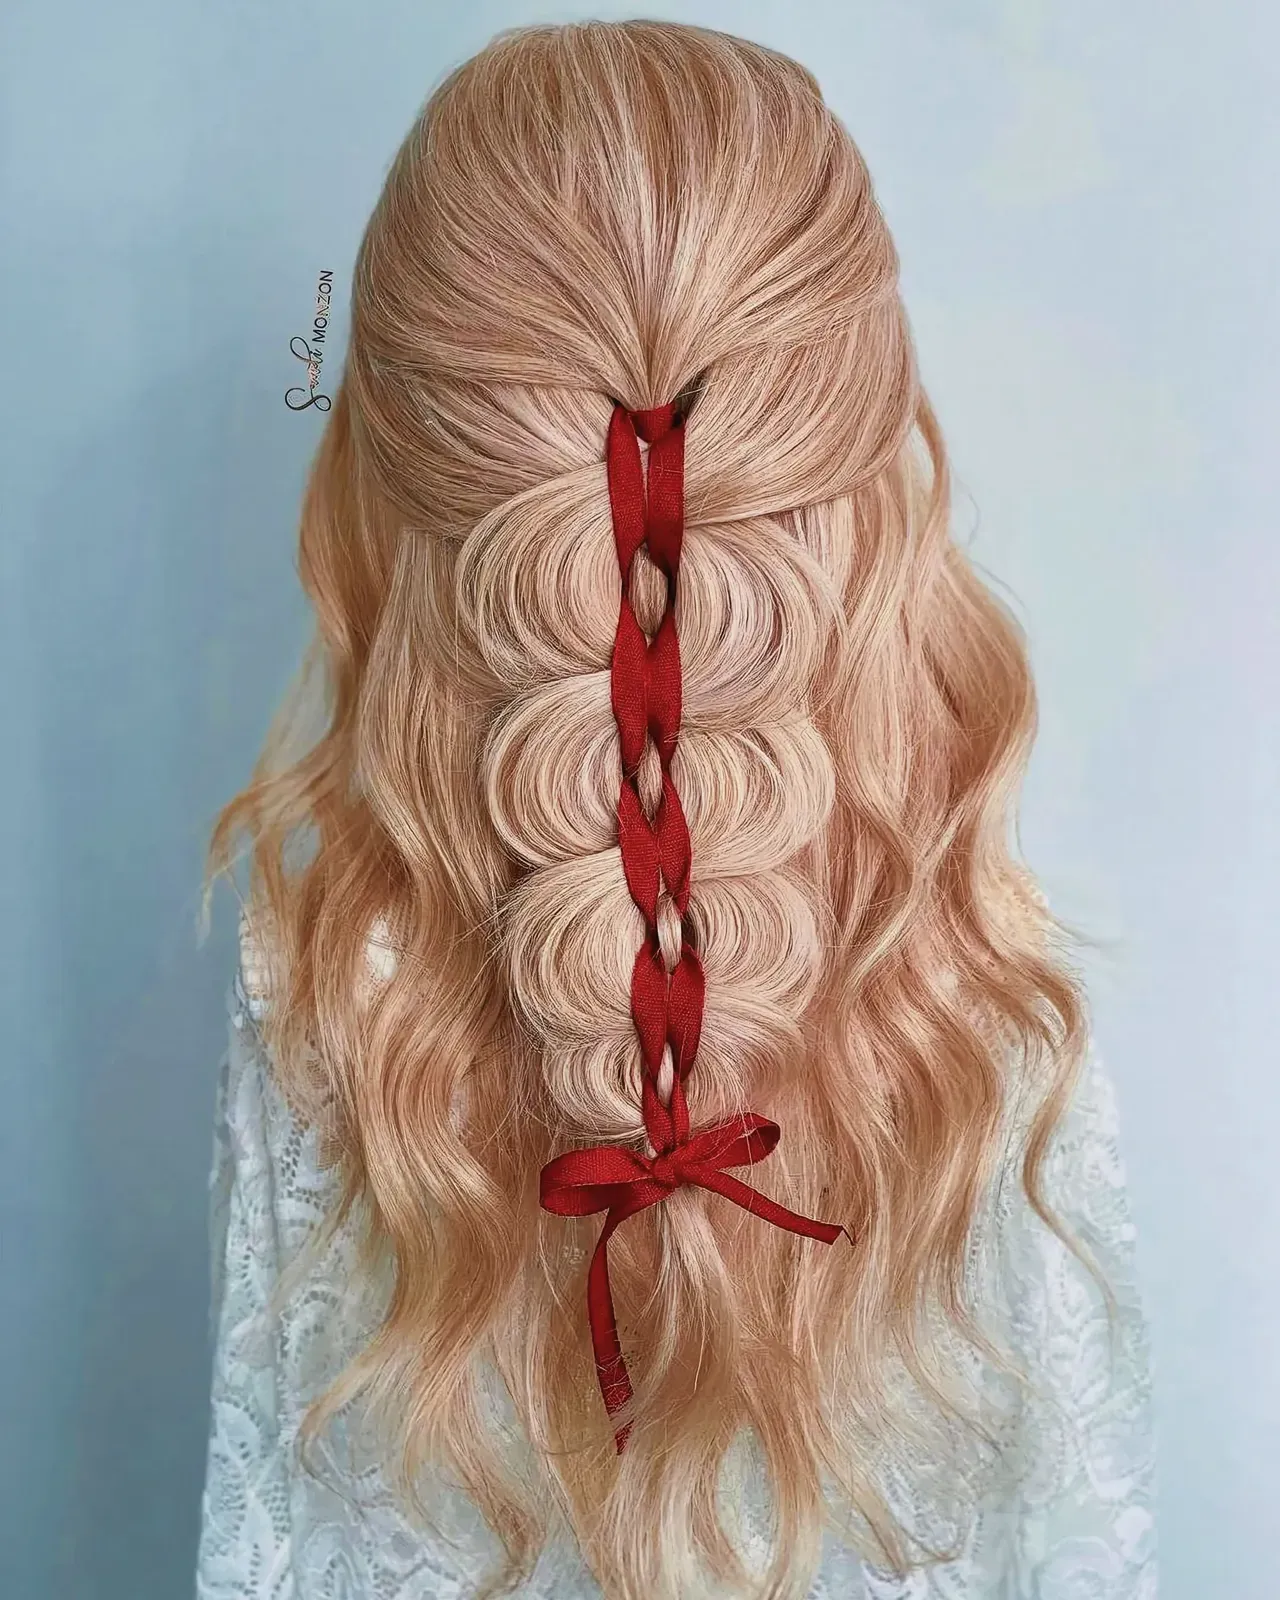 Close-up of a woman with a festive Christmas braid hairstyle